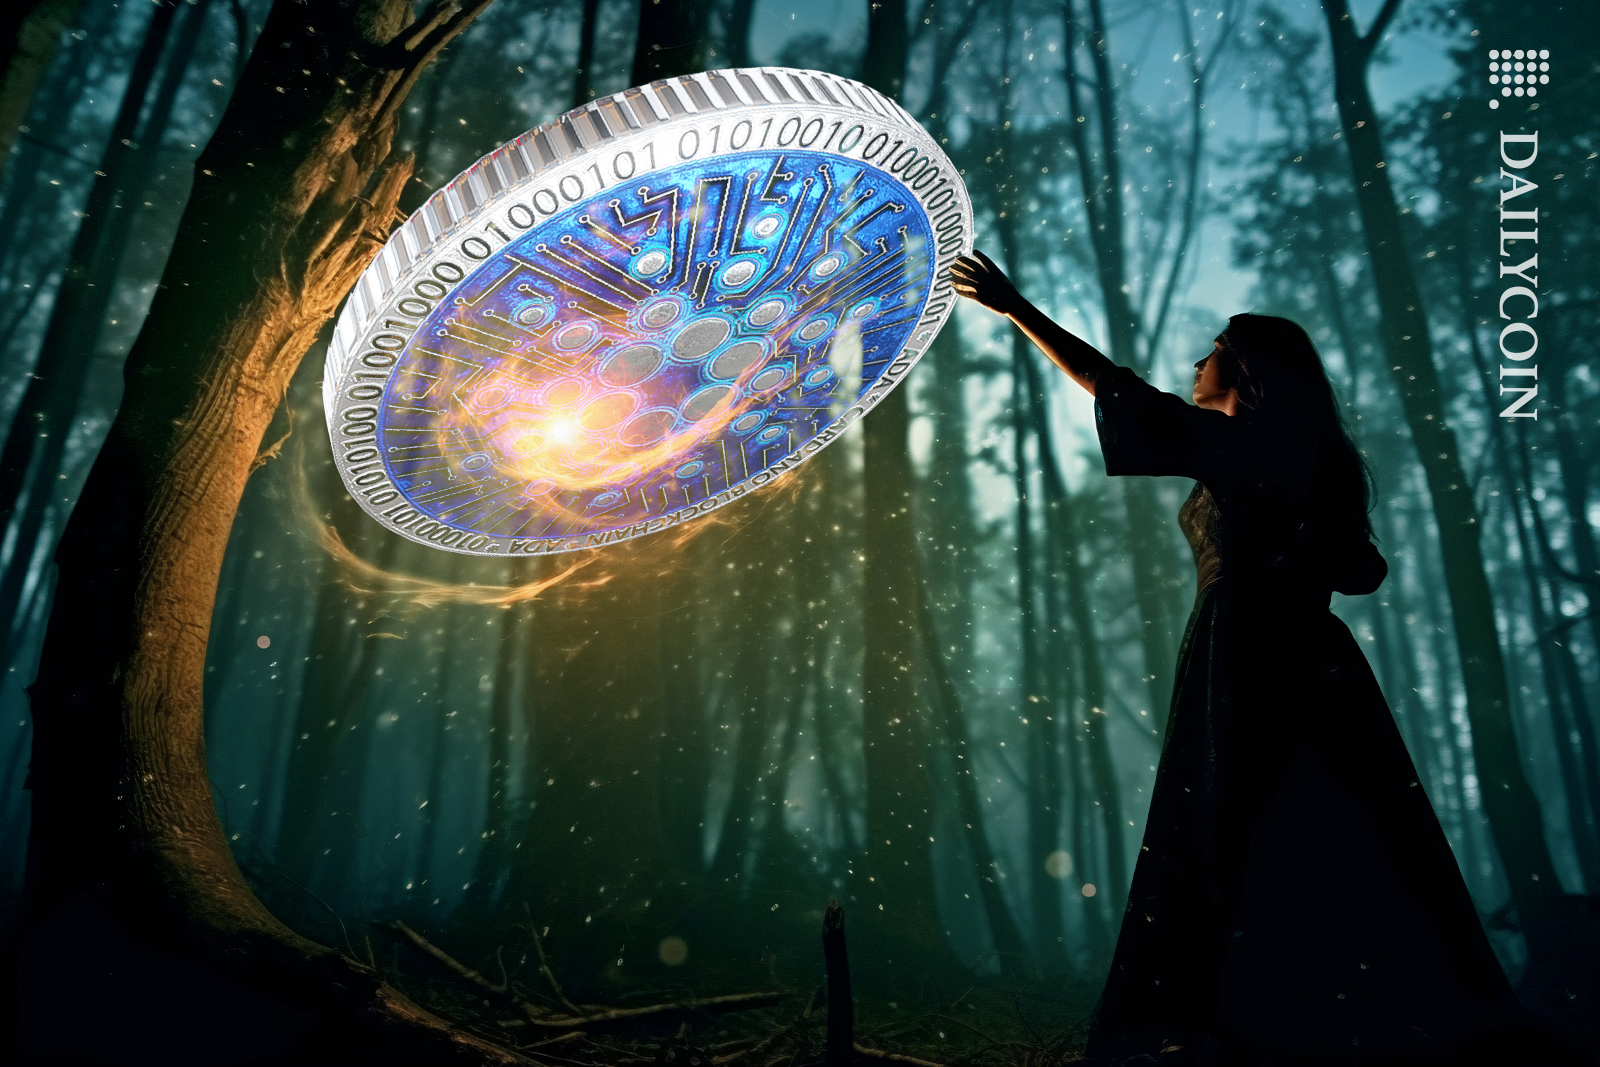 Cardano floating in the air in a mystic forest.